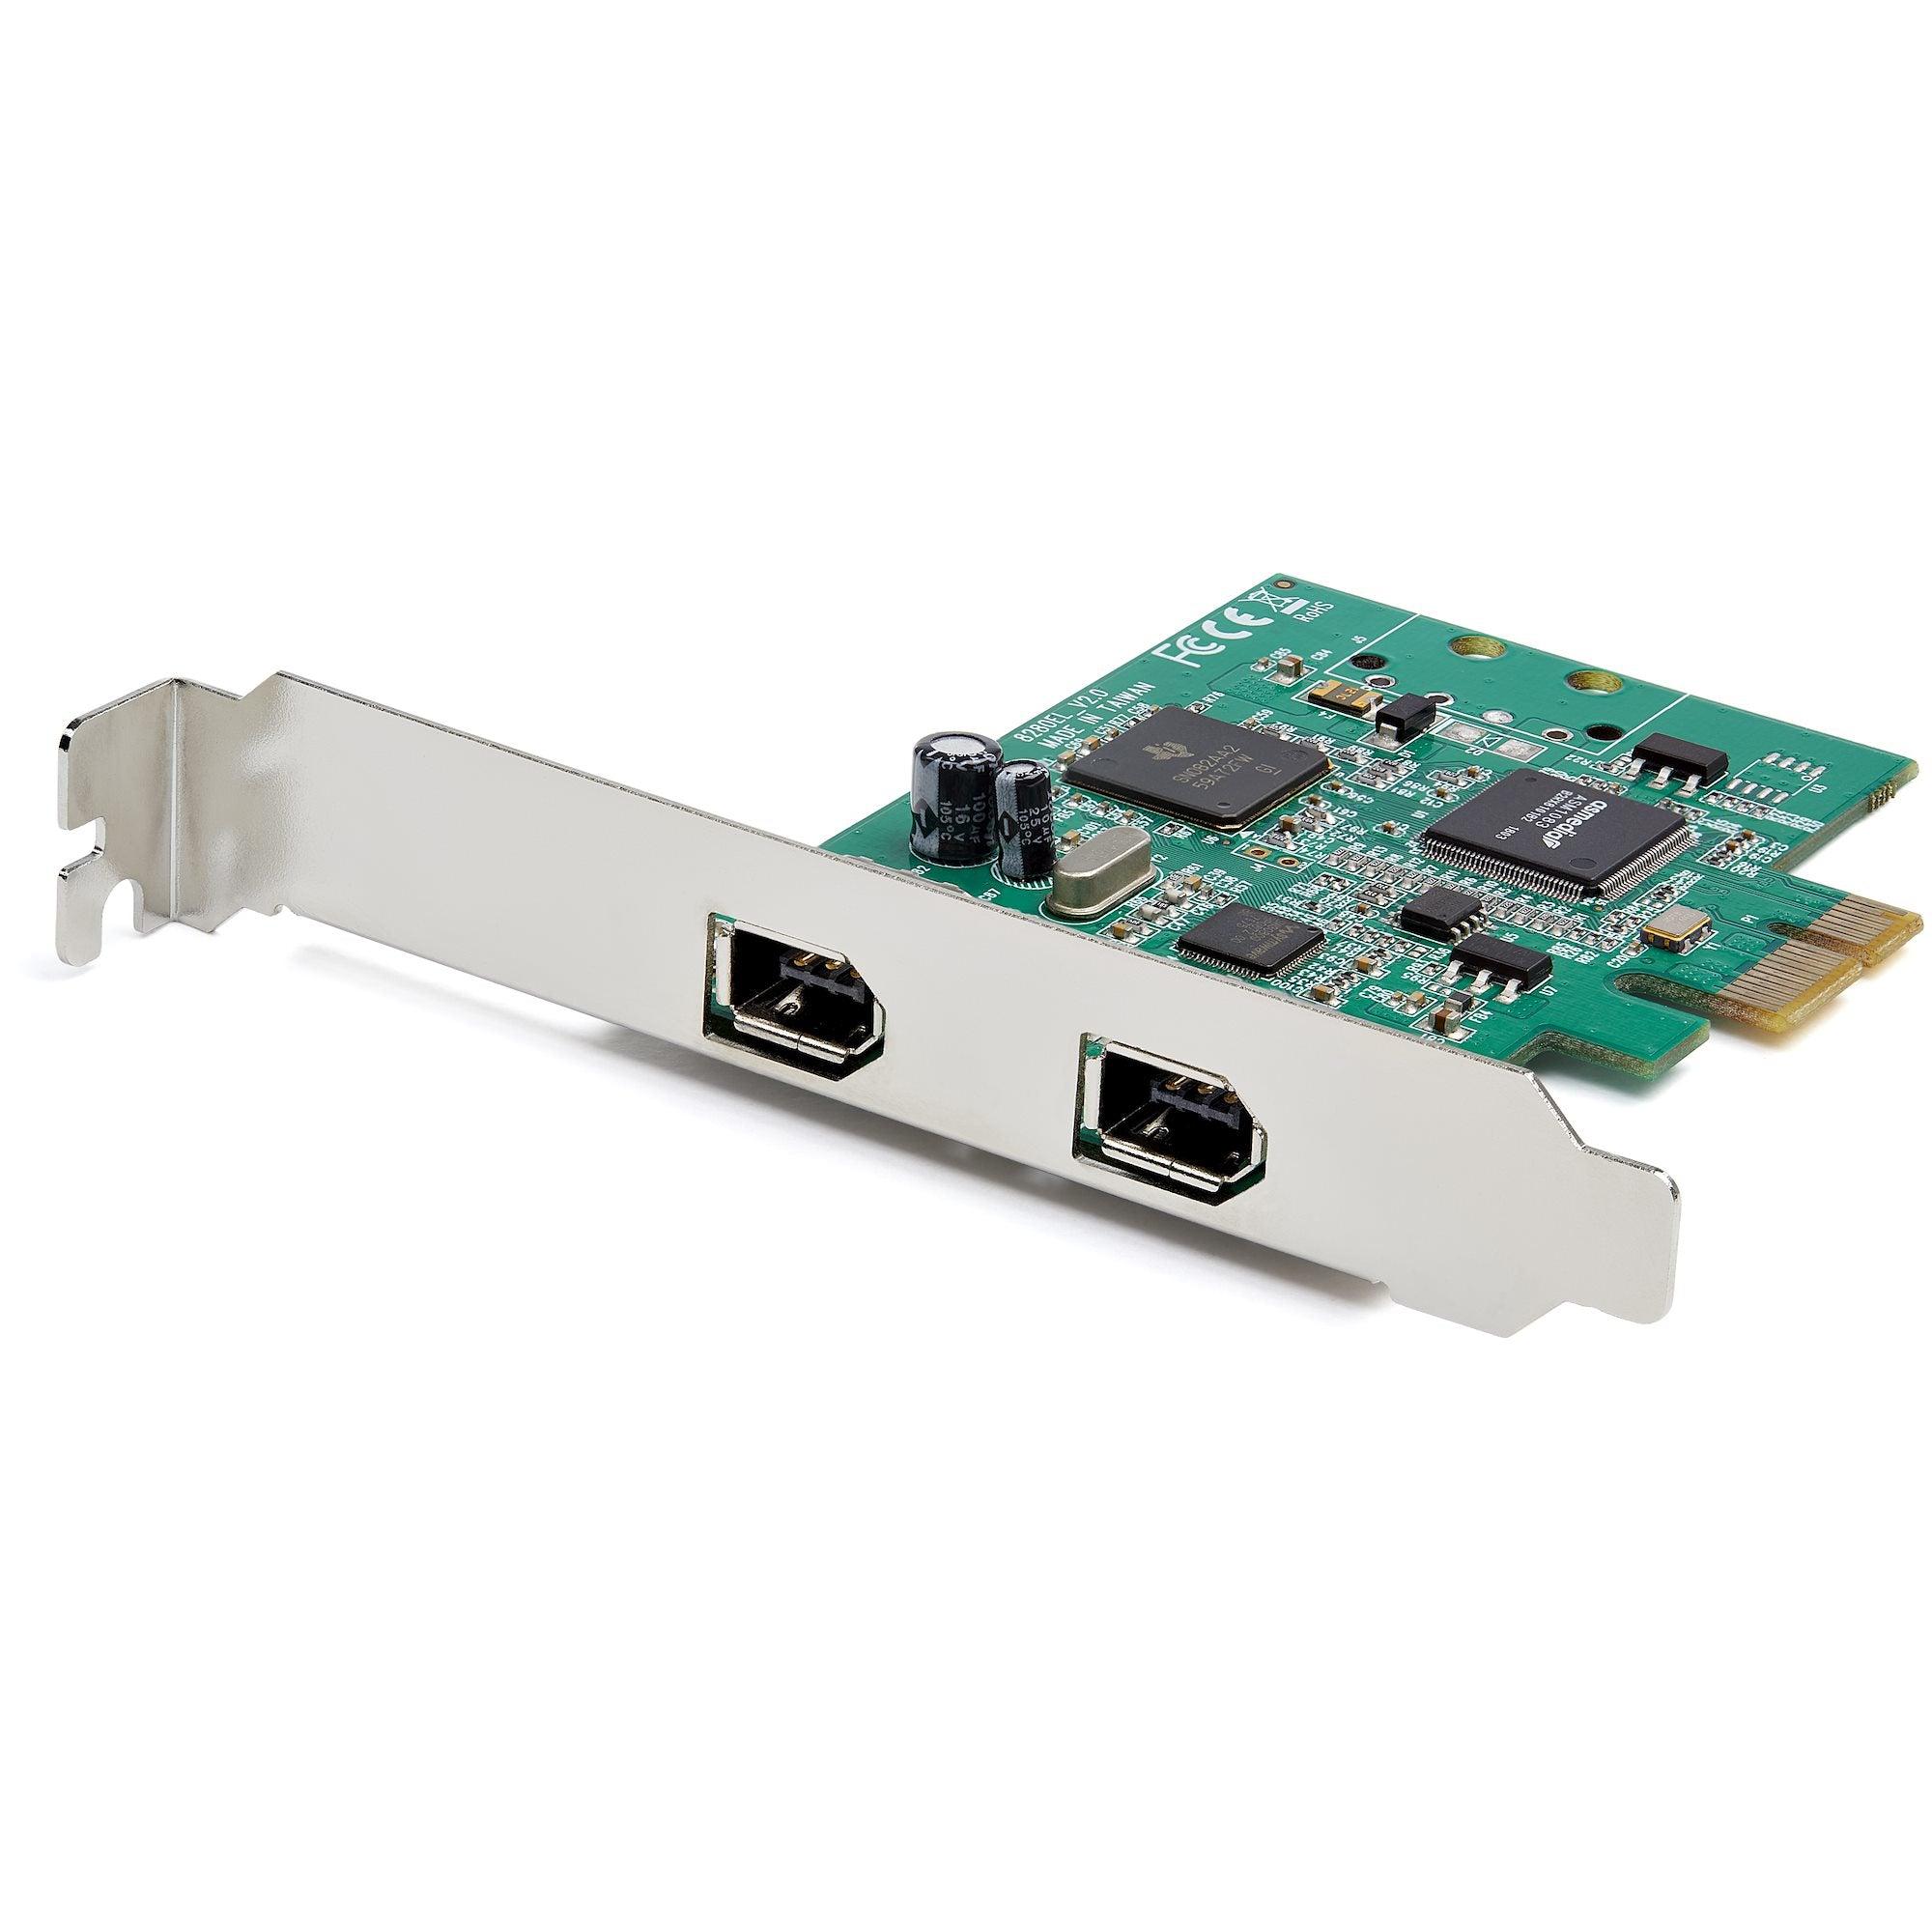 Product StarTech.com 2-Port PCI Express FireWire Card - PCIe FireWire 1394a Adapter - EuroBusiness Products UK image